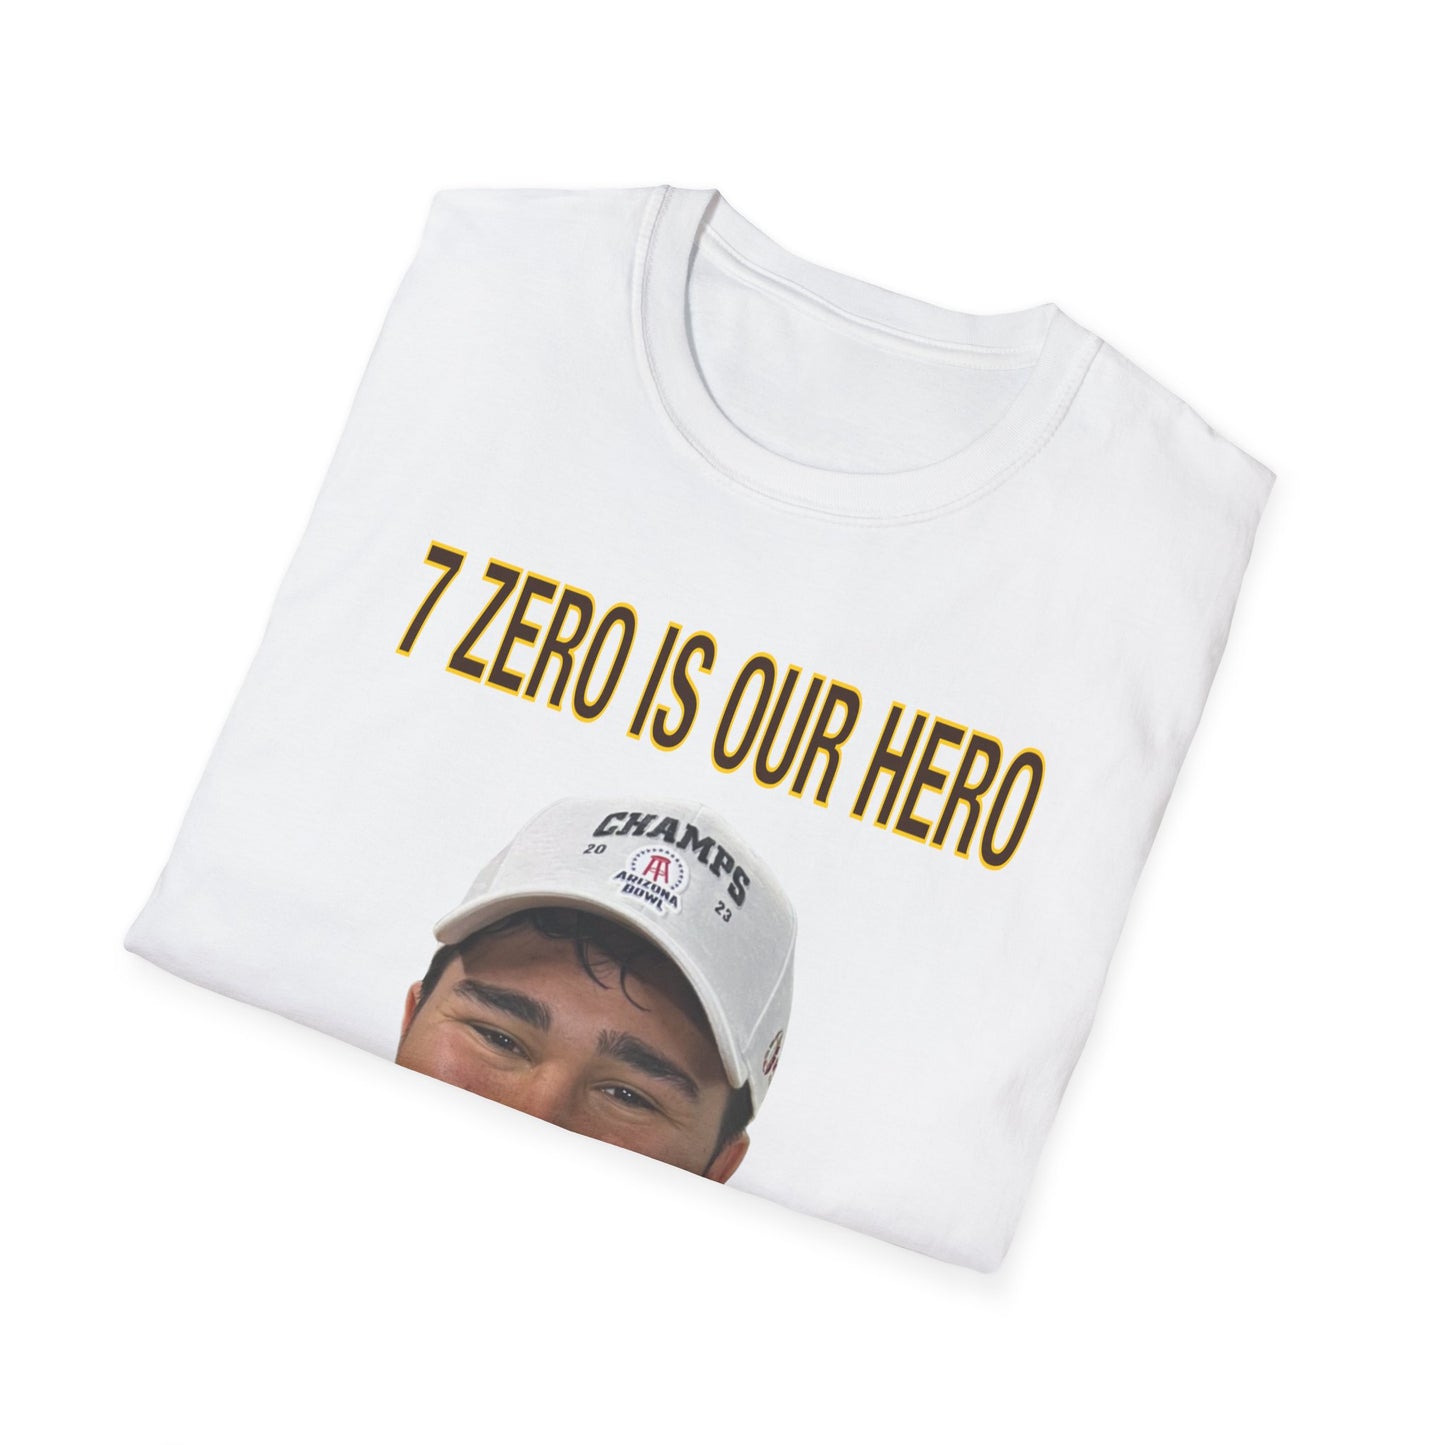 7 Zero Is Our Hero With Rex's Face